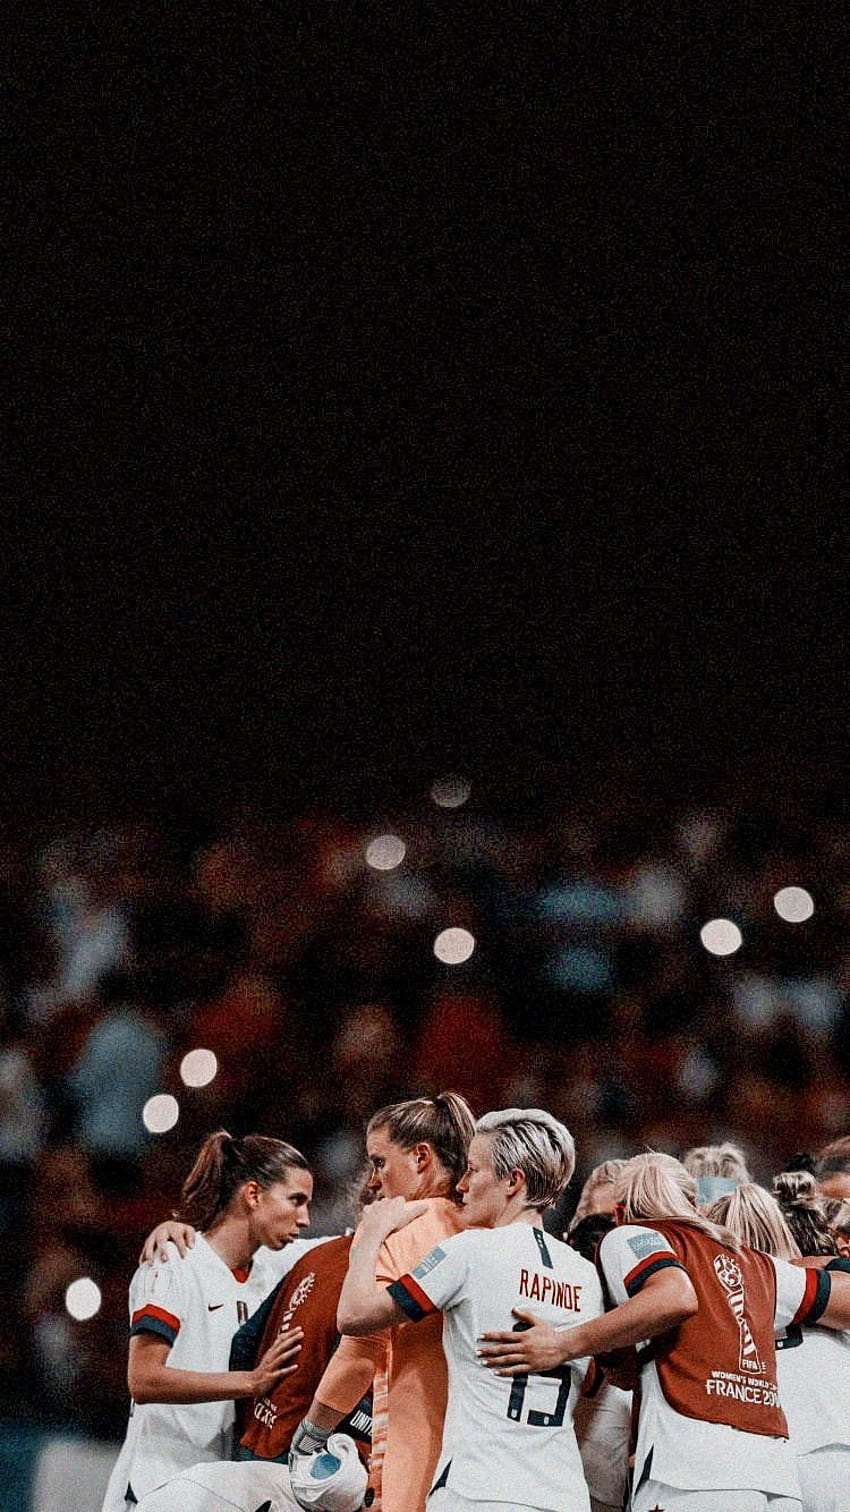 A group of women hugging each other on the field - Soccer